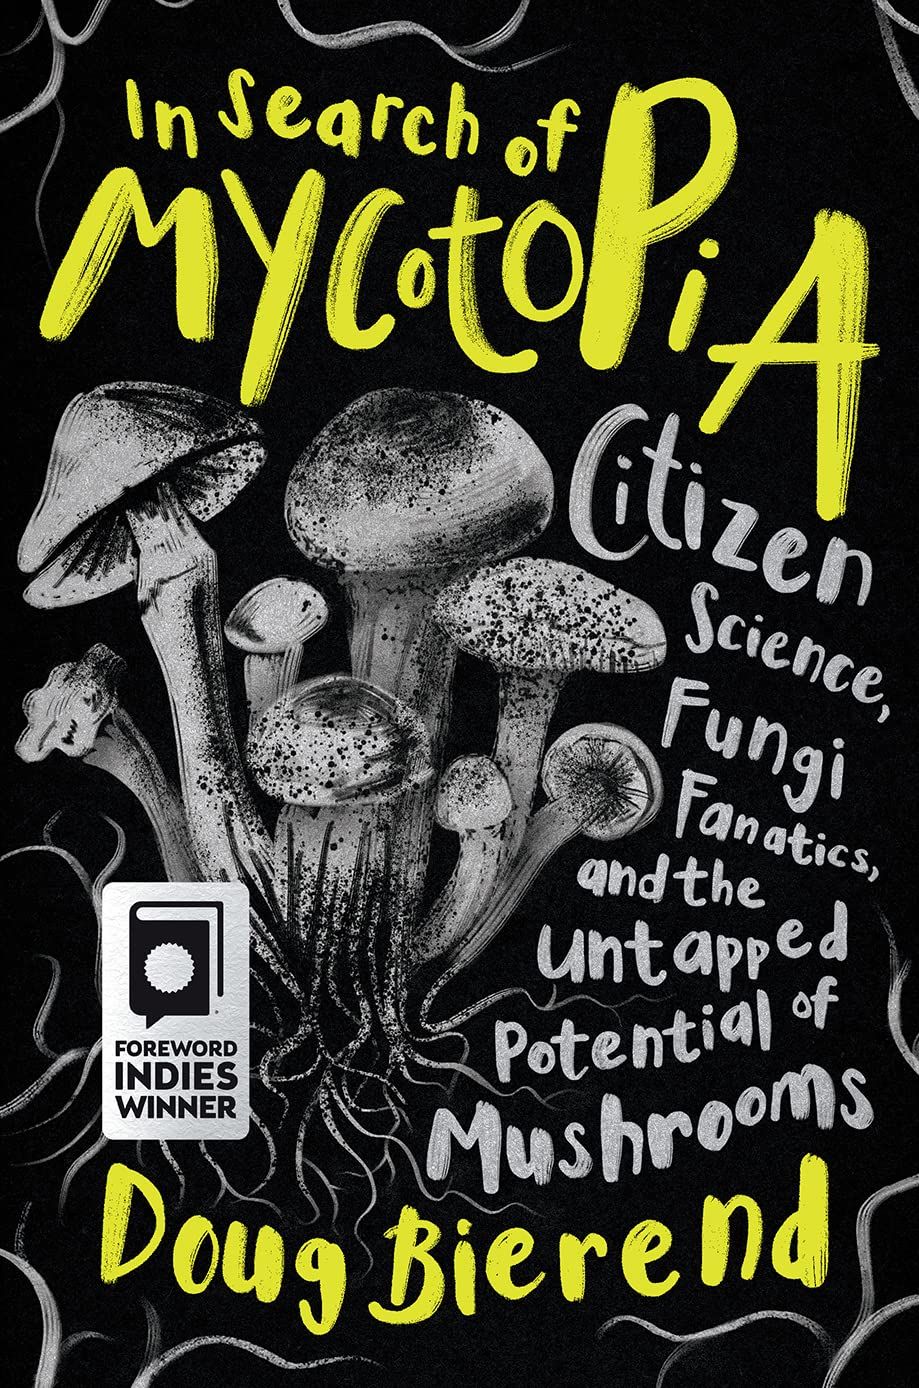 In Search of Mycotopia book cover